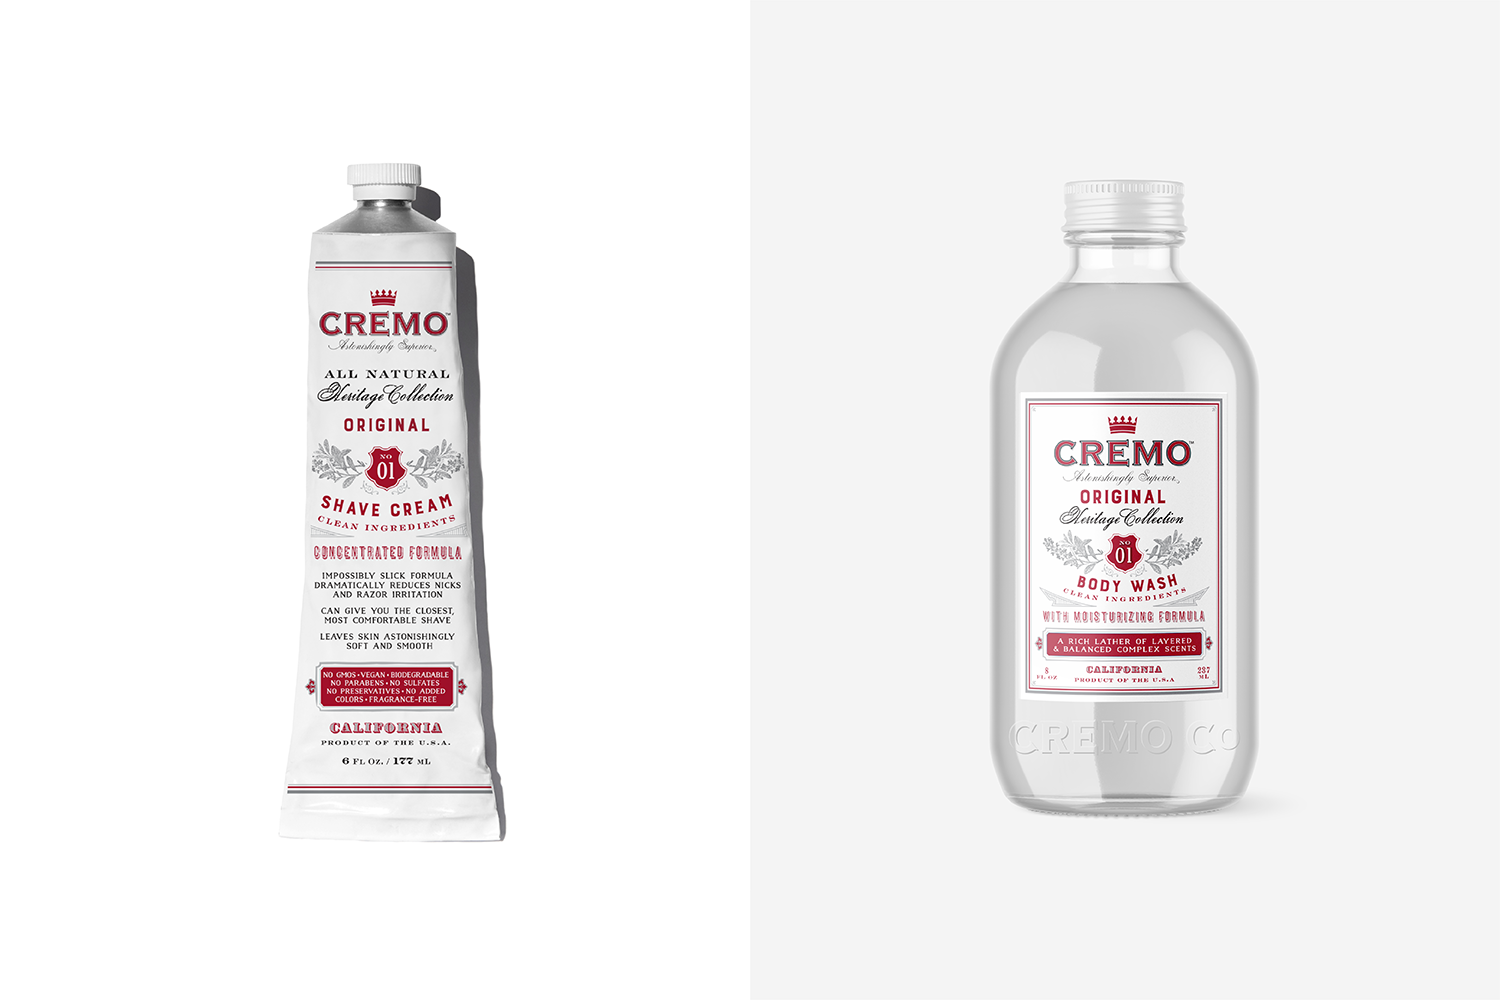 Cremo Heritage Collection